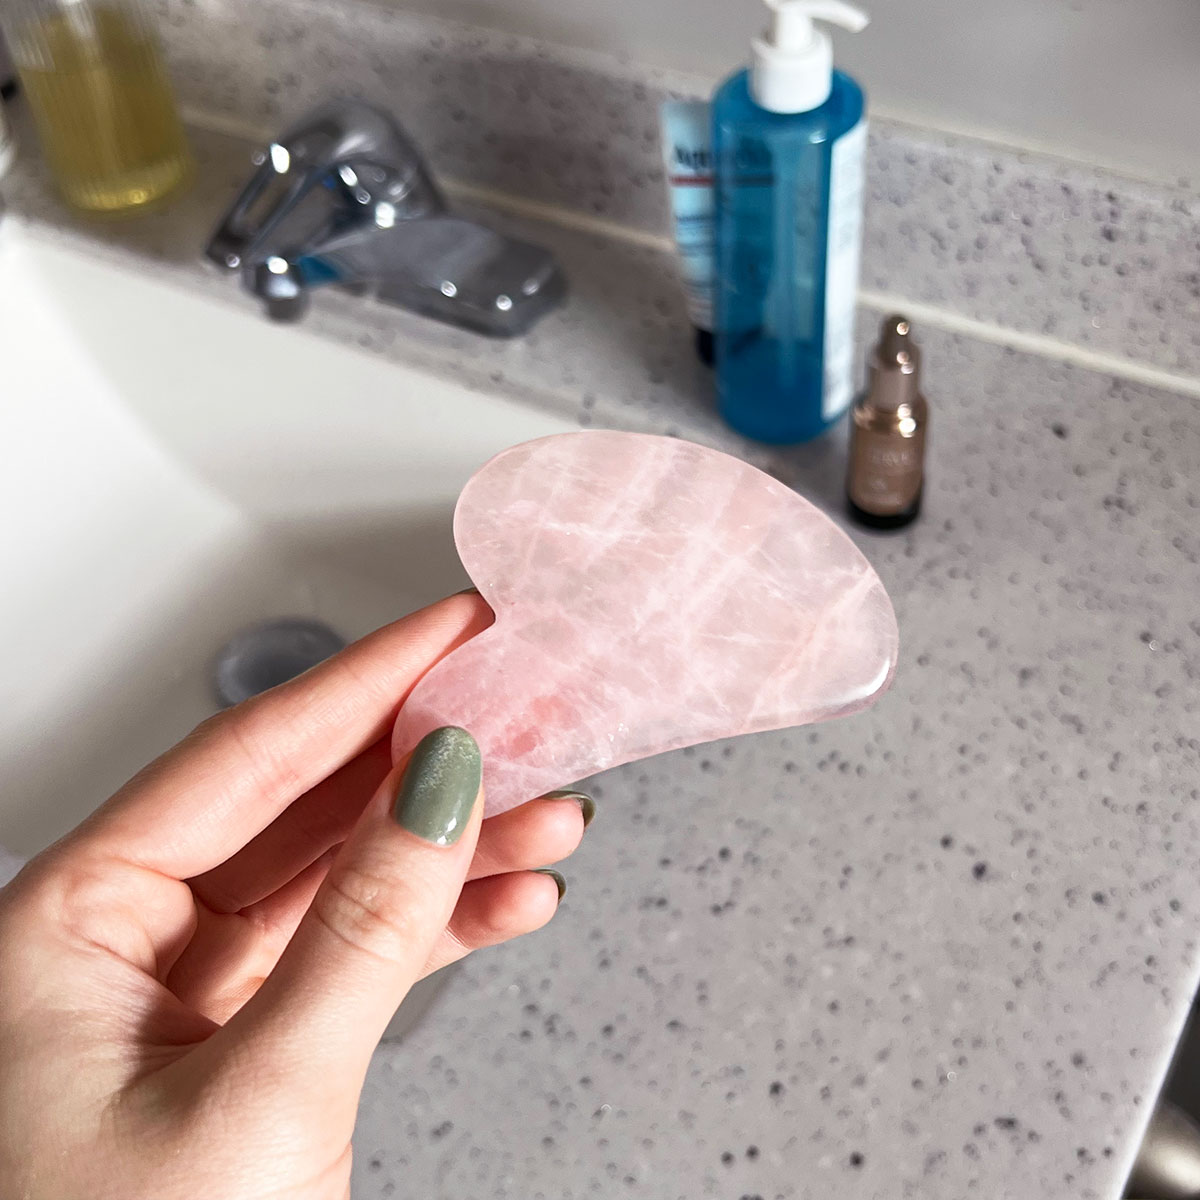 manicured hand holding pink gua sha sculpting tool over bathroom sink